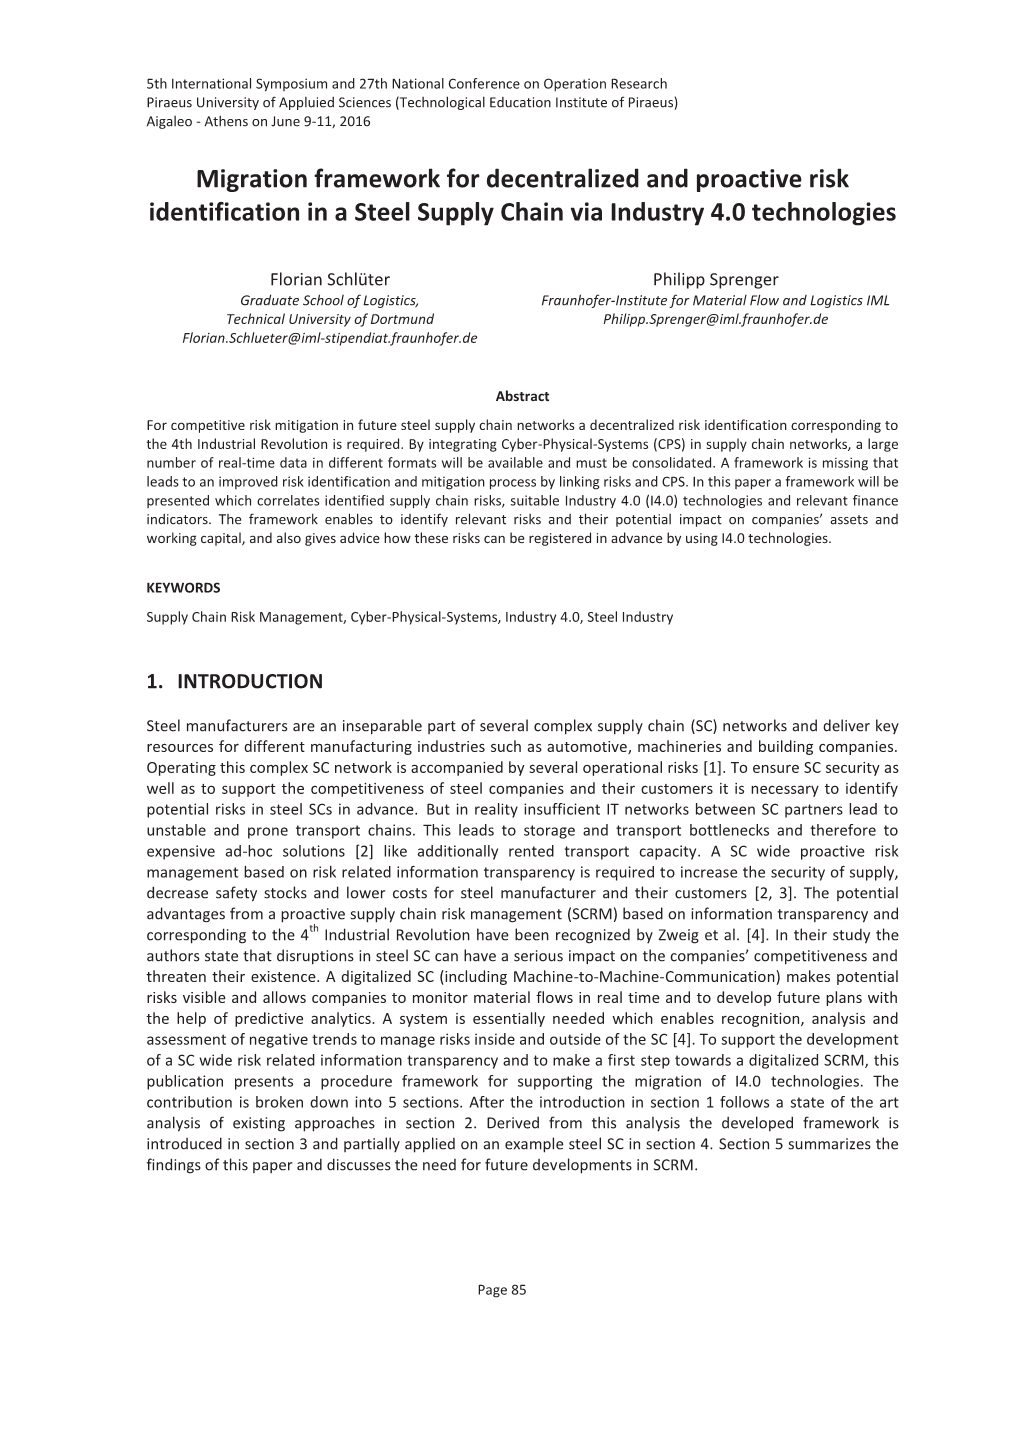 Migration Framework for Decentralized and Proactive Risk Identification in a Steel Supply Chain Via Industry 4.0 Technologies